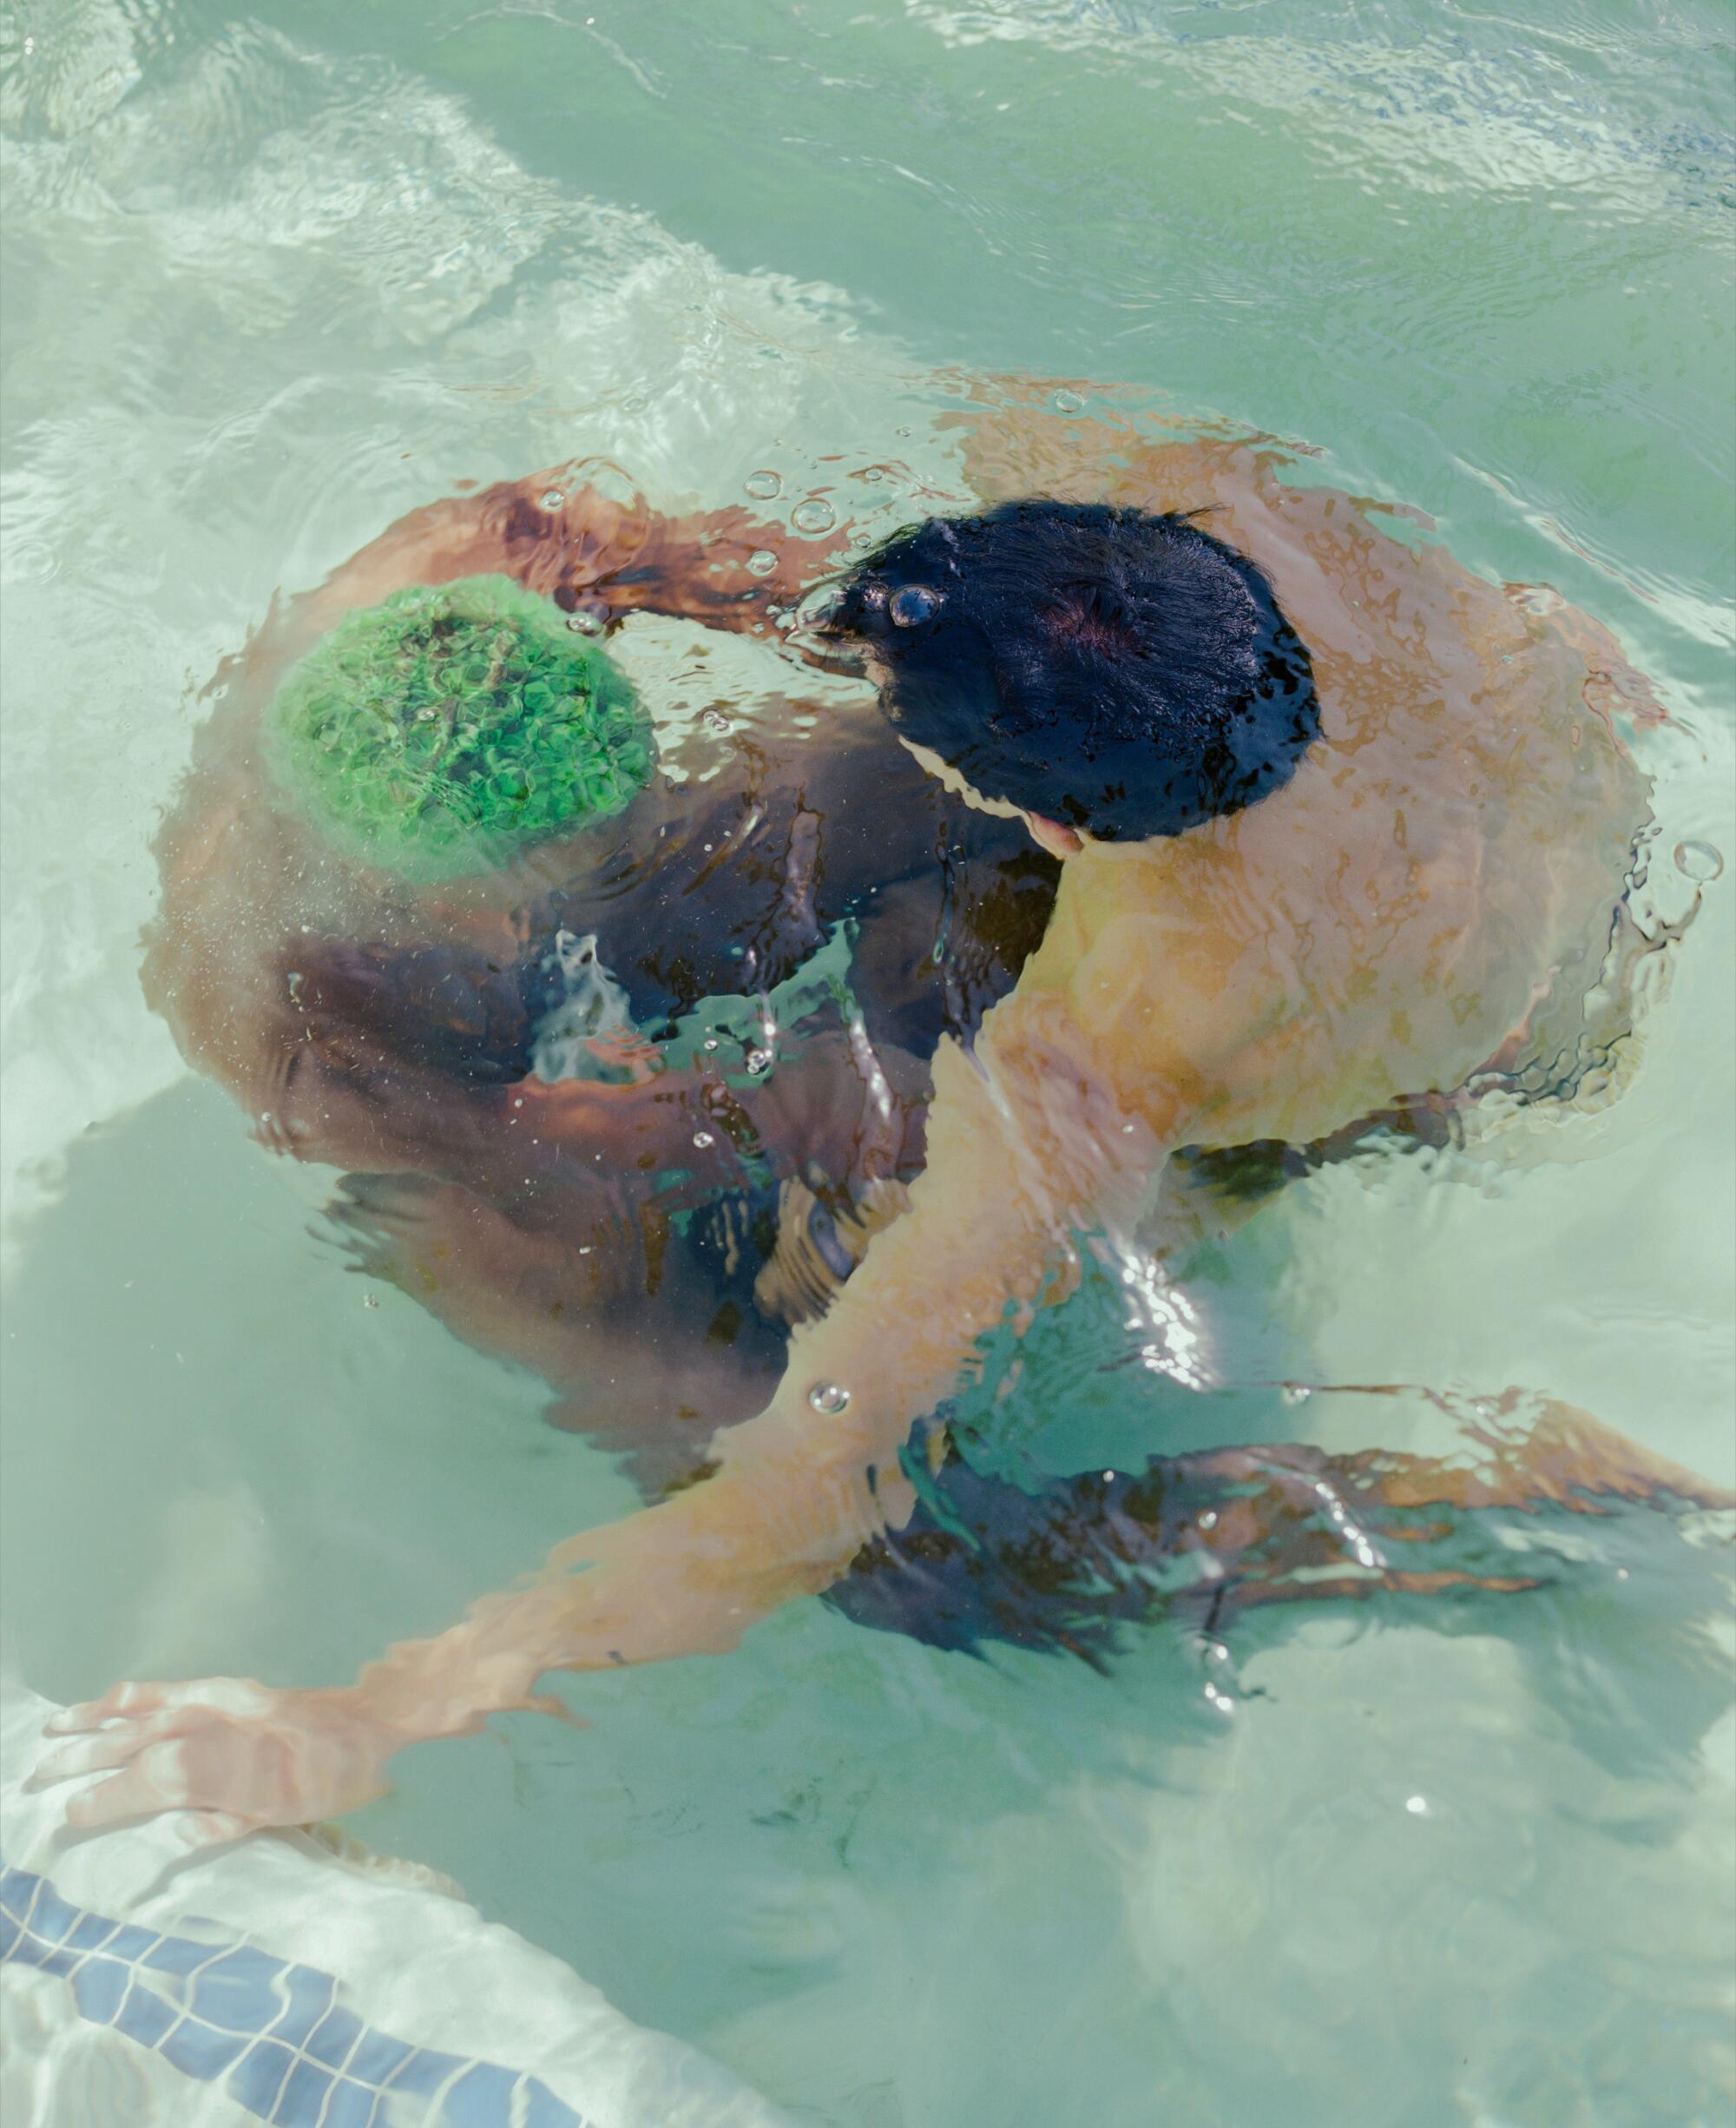 Seen from above, two men face each other in a swimming pool.